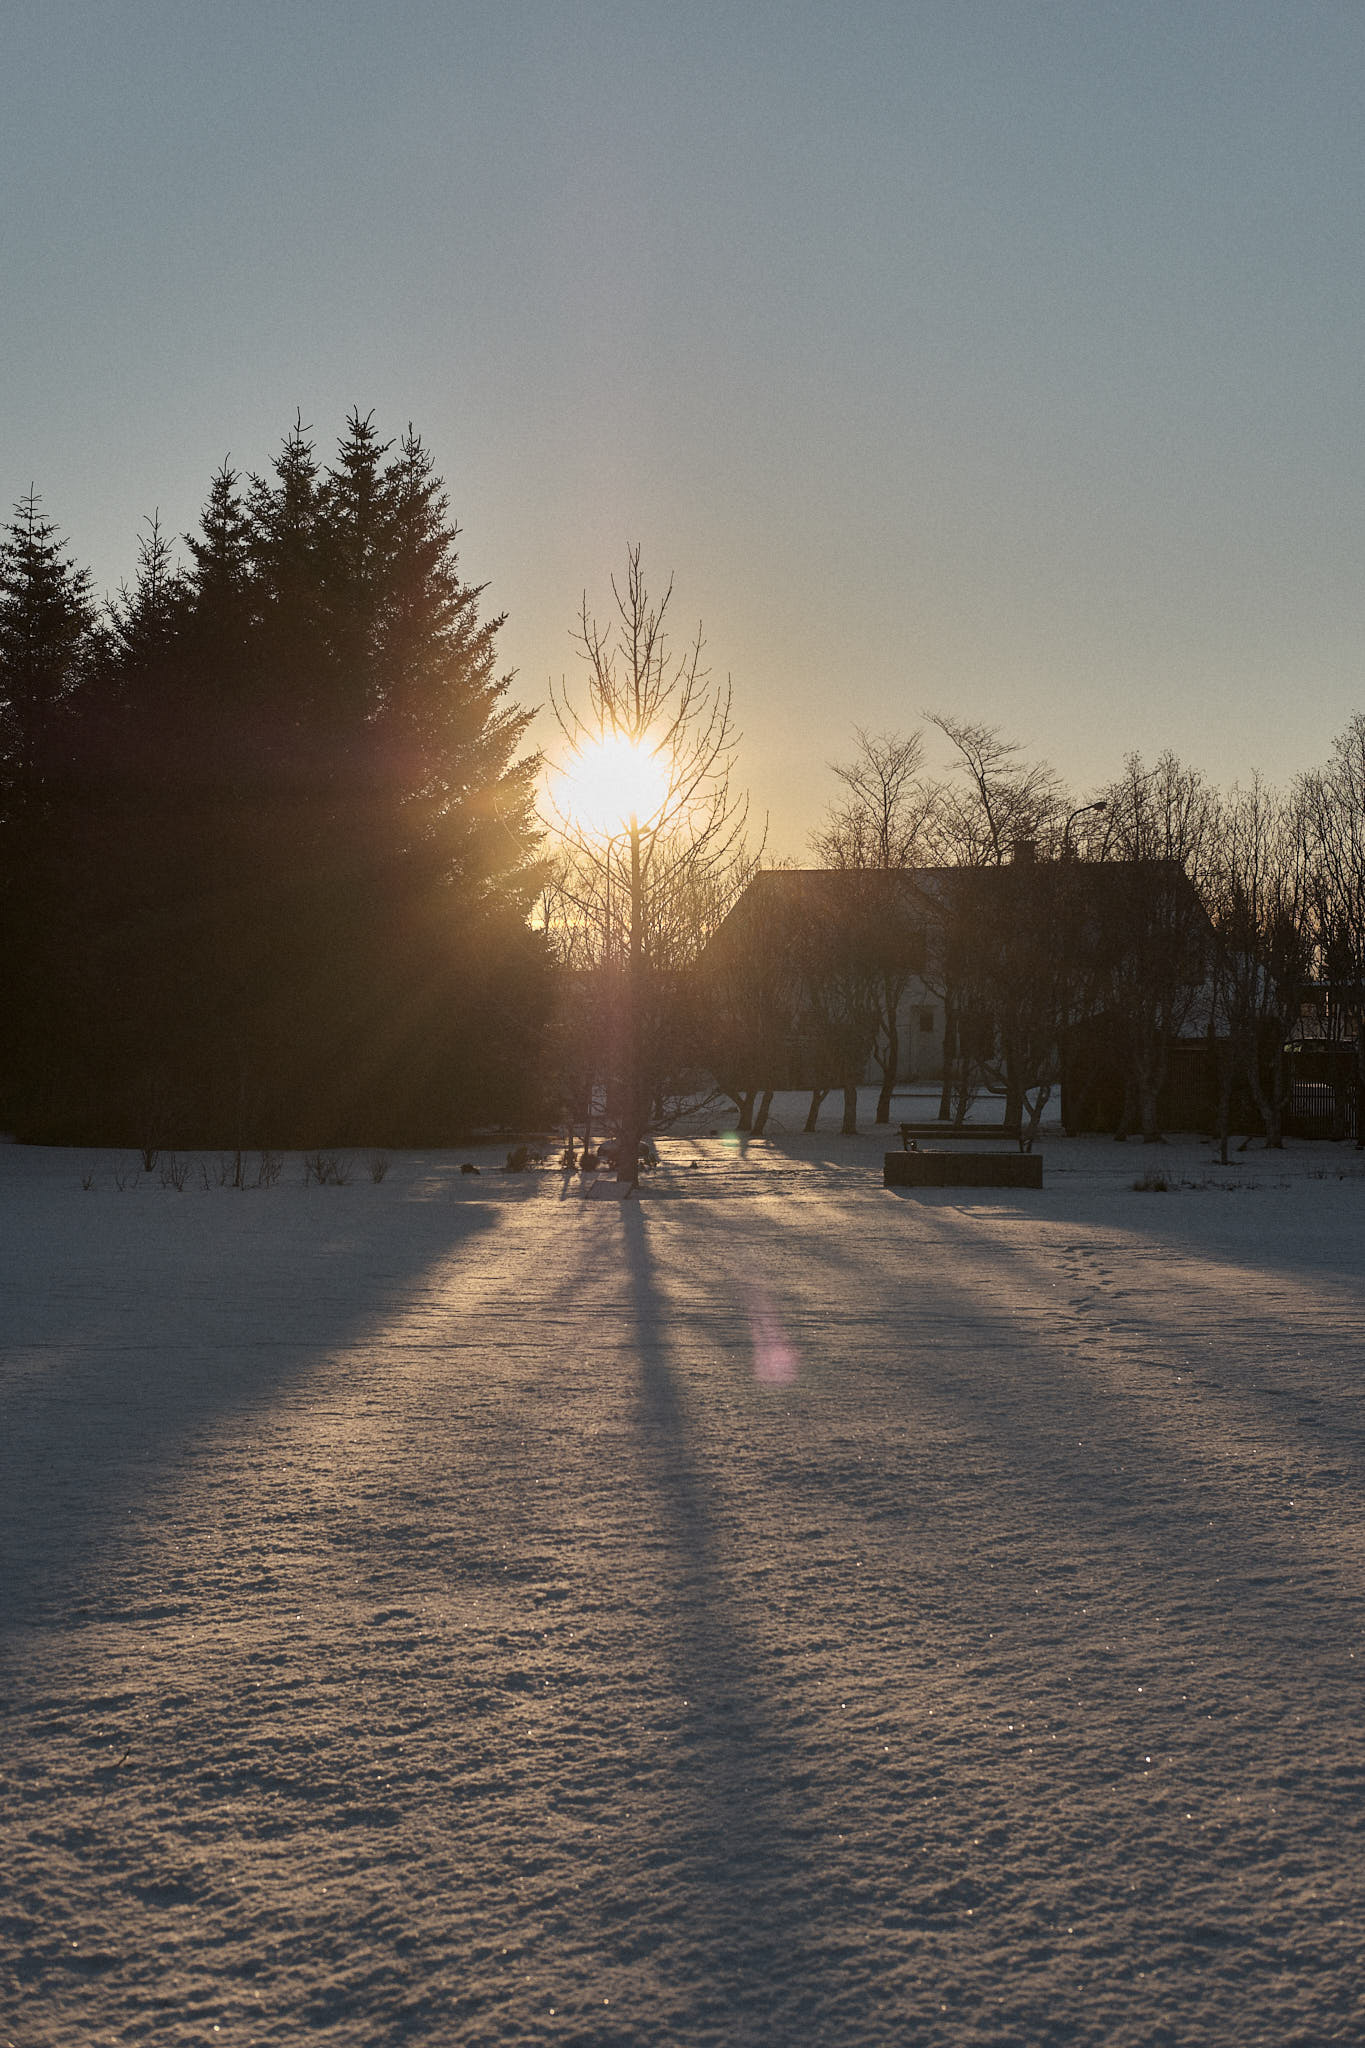 The sun sets in the local Hveragerði park